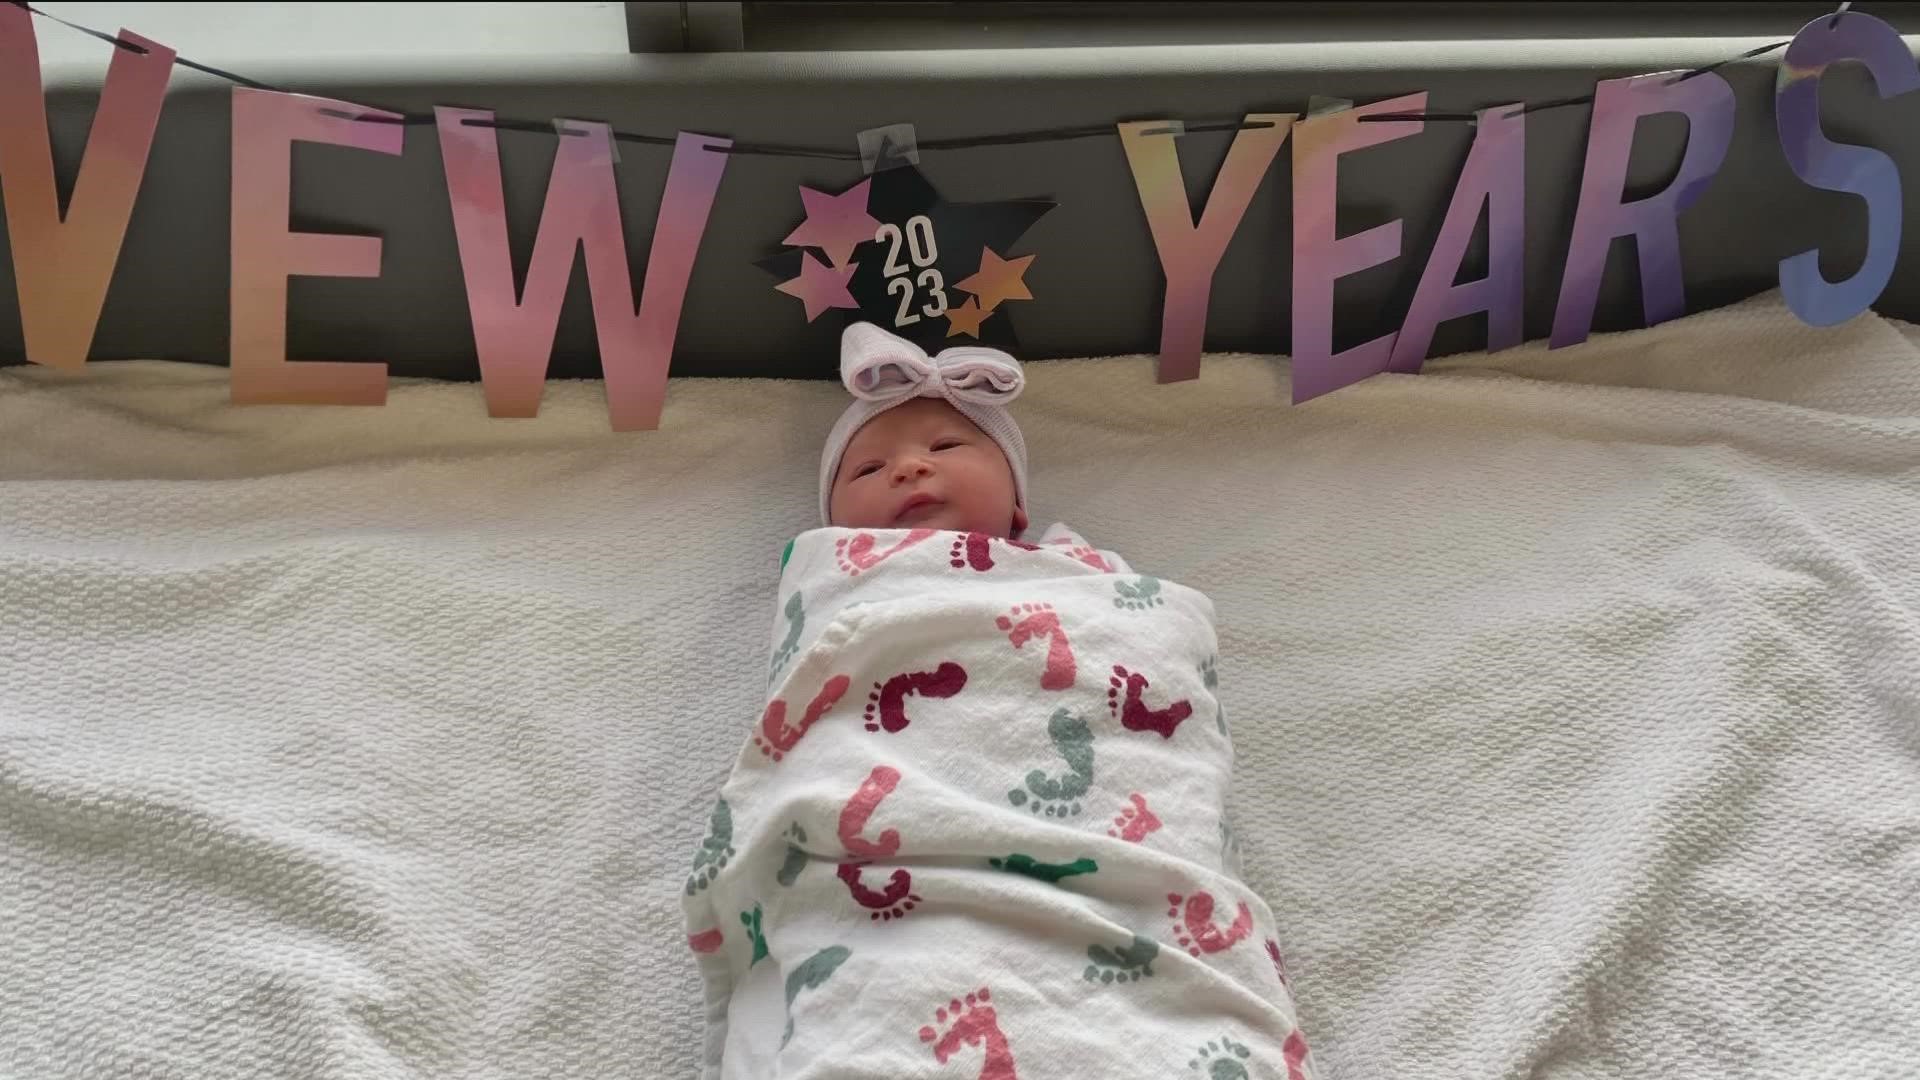 The beautiful baby girl named Mila was born as the clock struck 12 a.m. on New Years Eve.